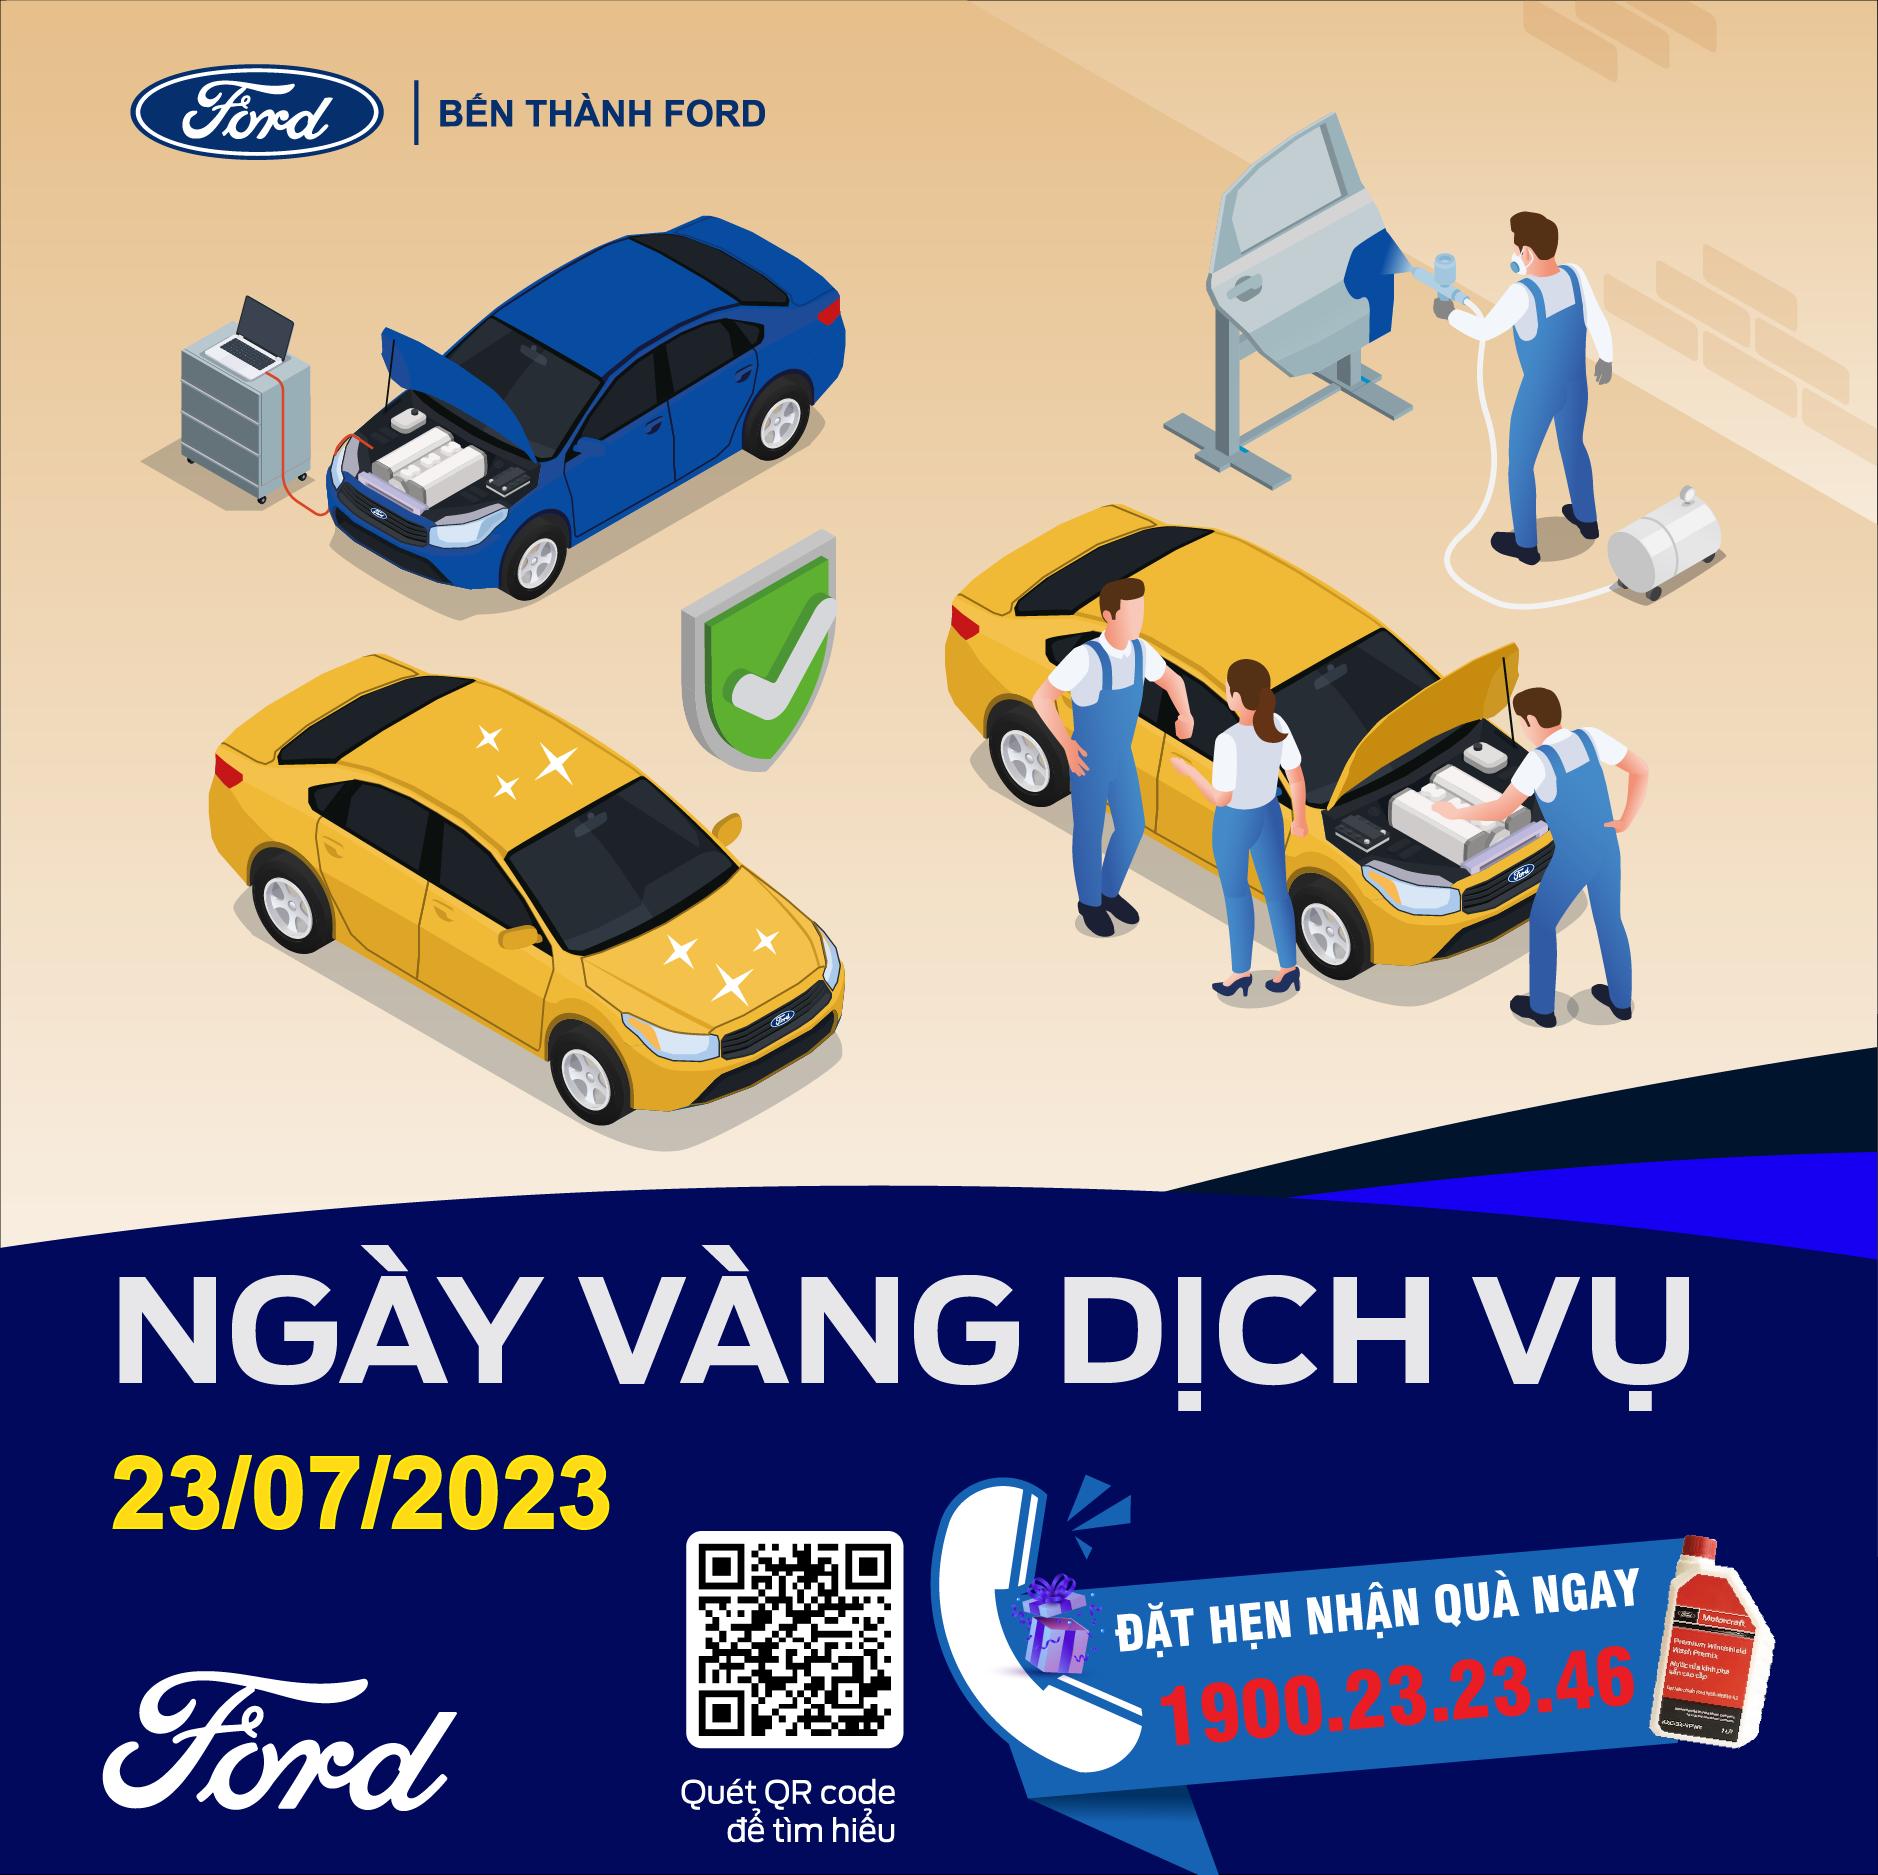 golden day service - ngay vang dich vu ford